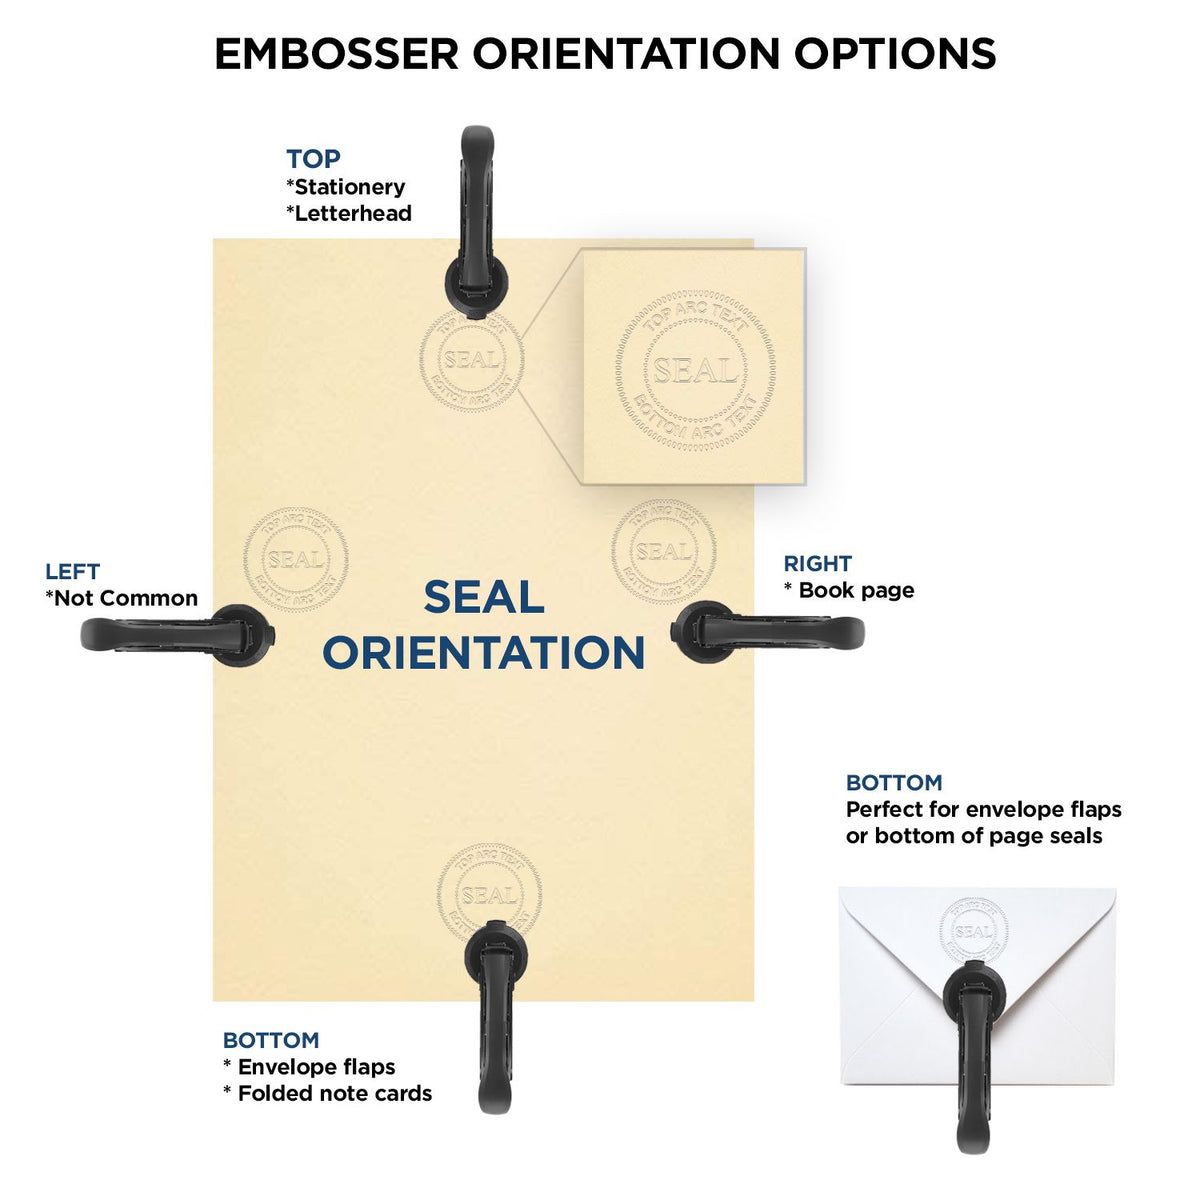 An infographic for the Extended Long Reach Connecticut Surveyor Embosser showing embosser orientation, this is showing examples of a top, bottom, right and left insert.